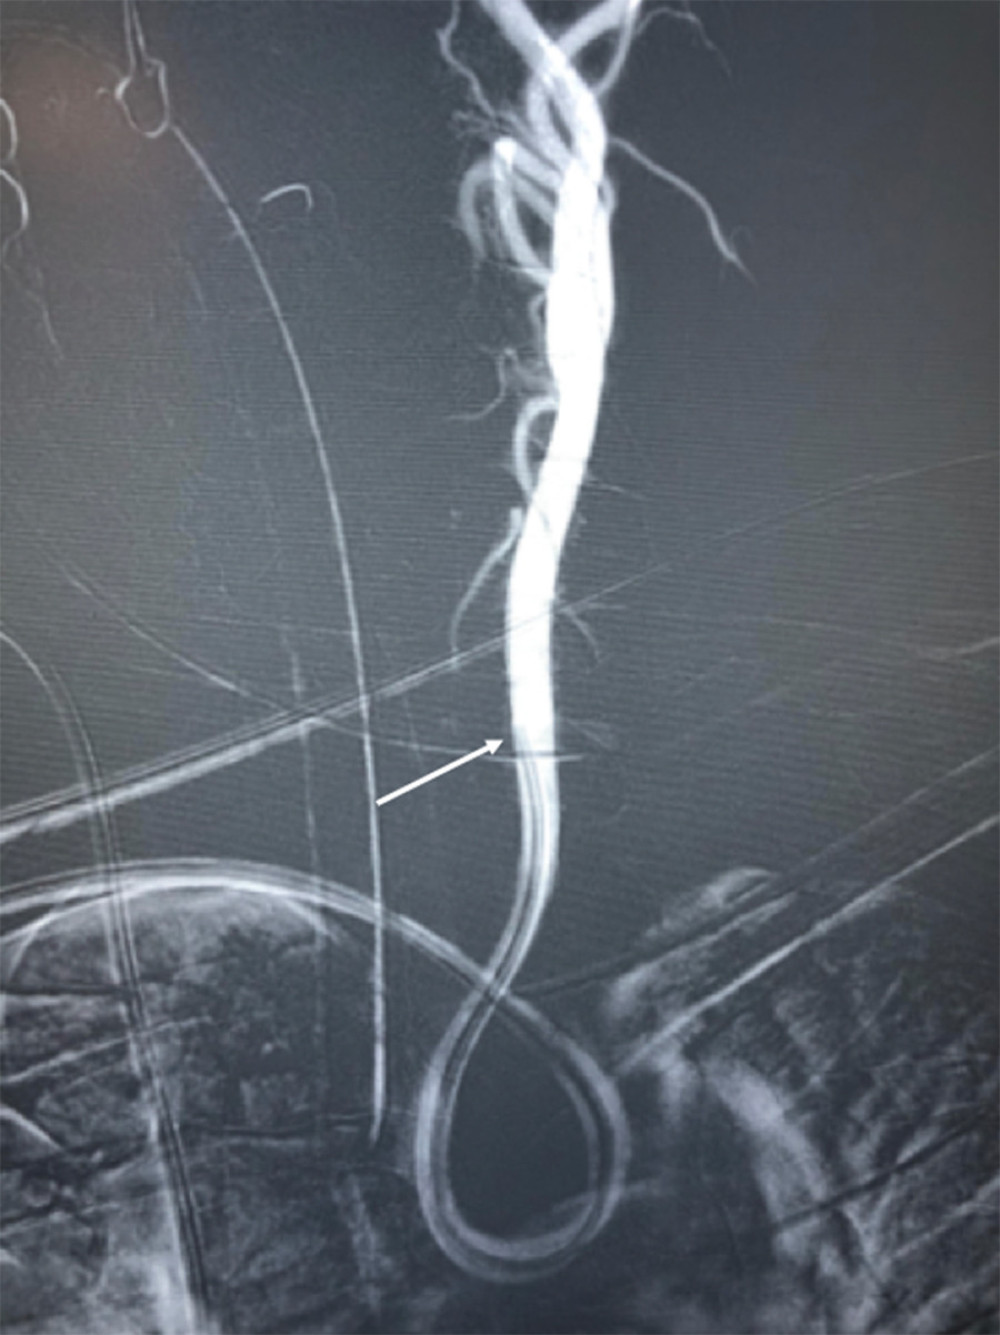 A complete curved Simmons catheter is located in the left carotid artery during angiography. White arrow shows distal tip of Simmons catheter in common left carotid artery.